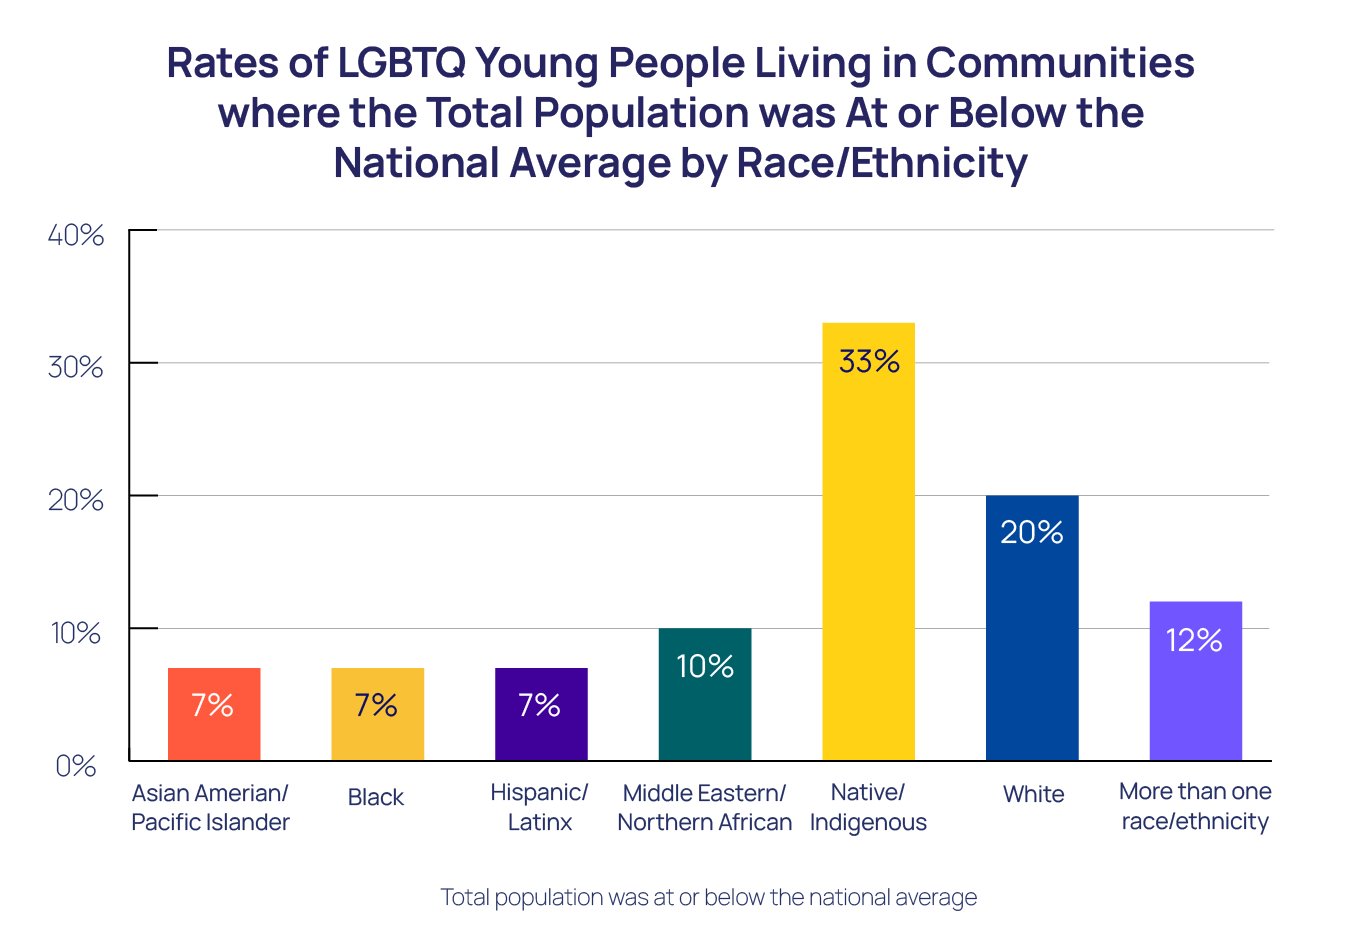 Rates of LGNTQ Young People Living in Communities where the Total Population was at or below the National Average by Race/Ethnicity Bar Chart